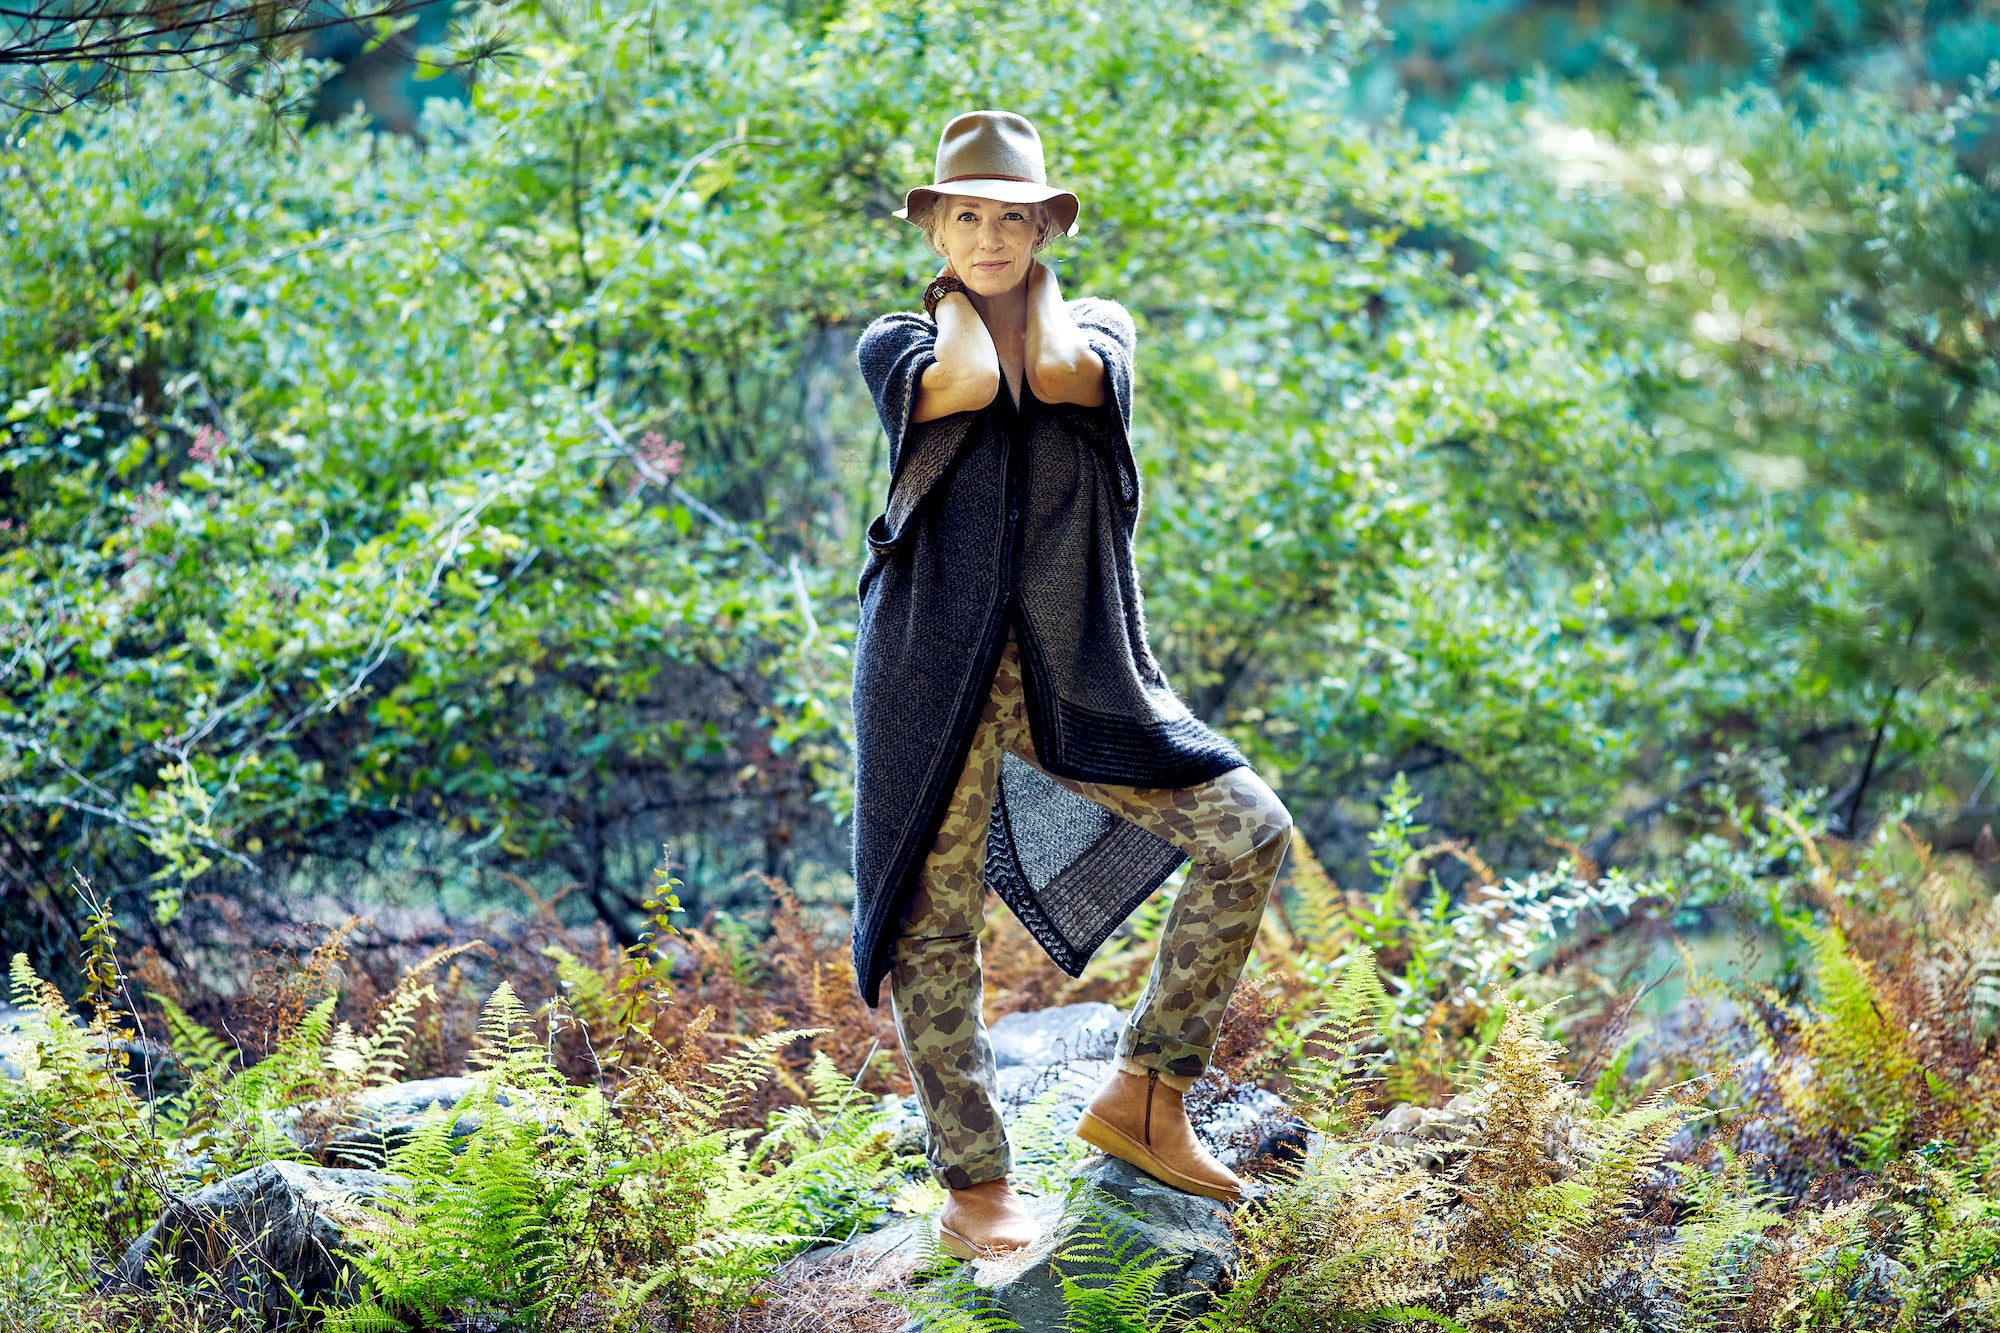 Full body image of Laura Chávez Silverman posing on a rock surrounded by nature.